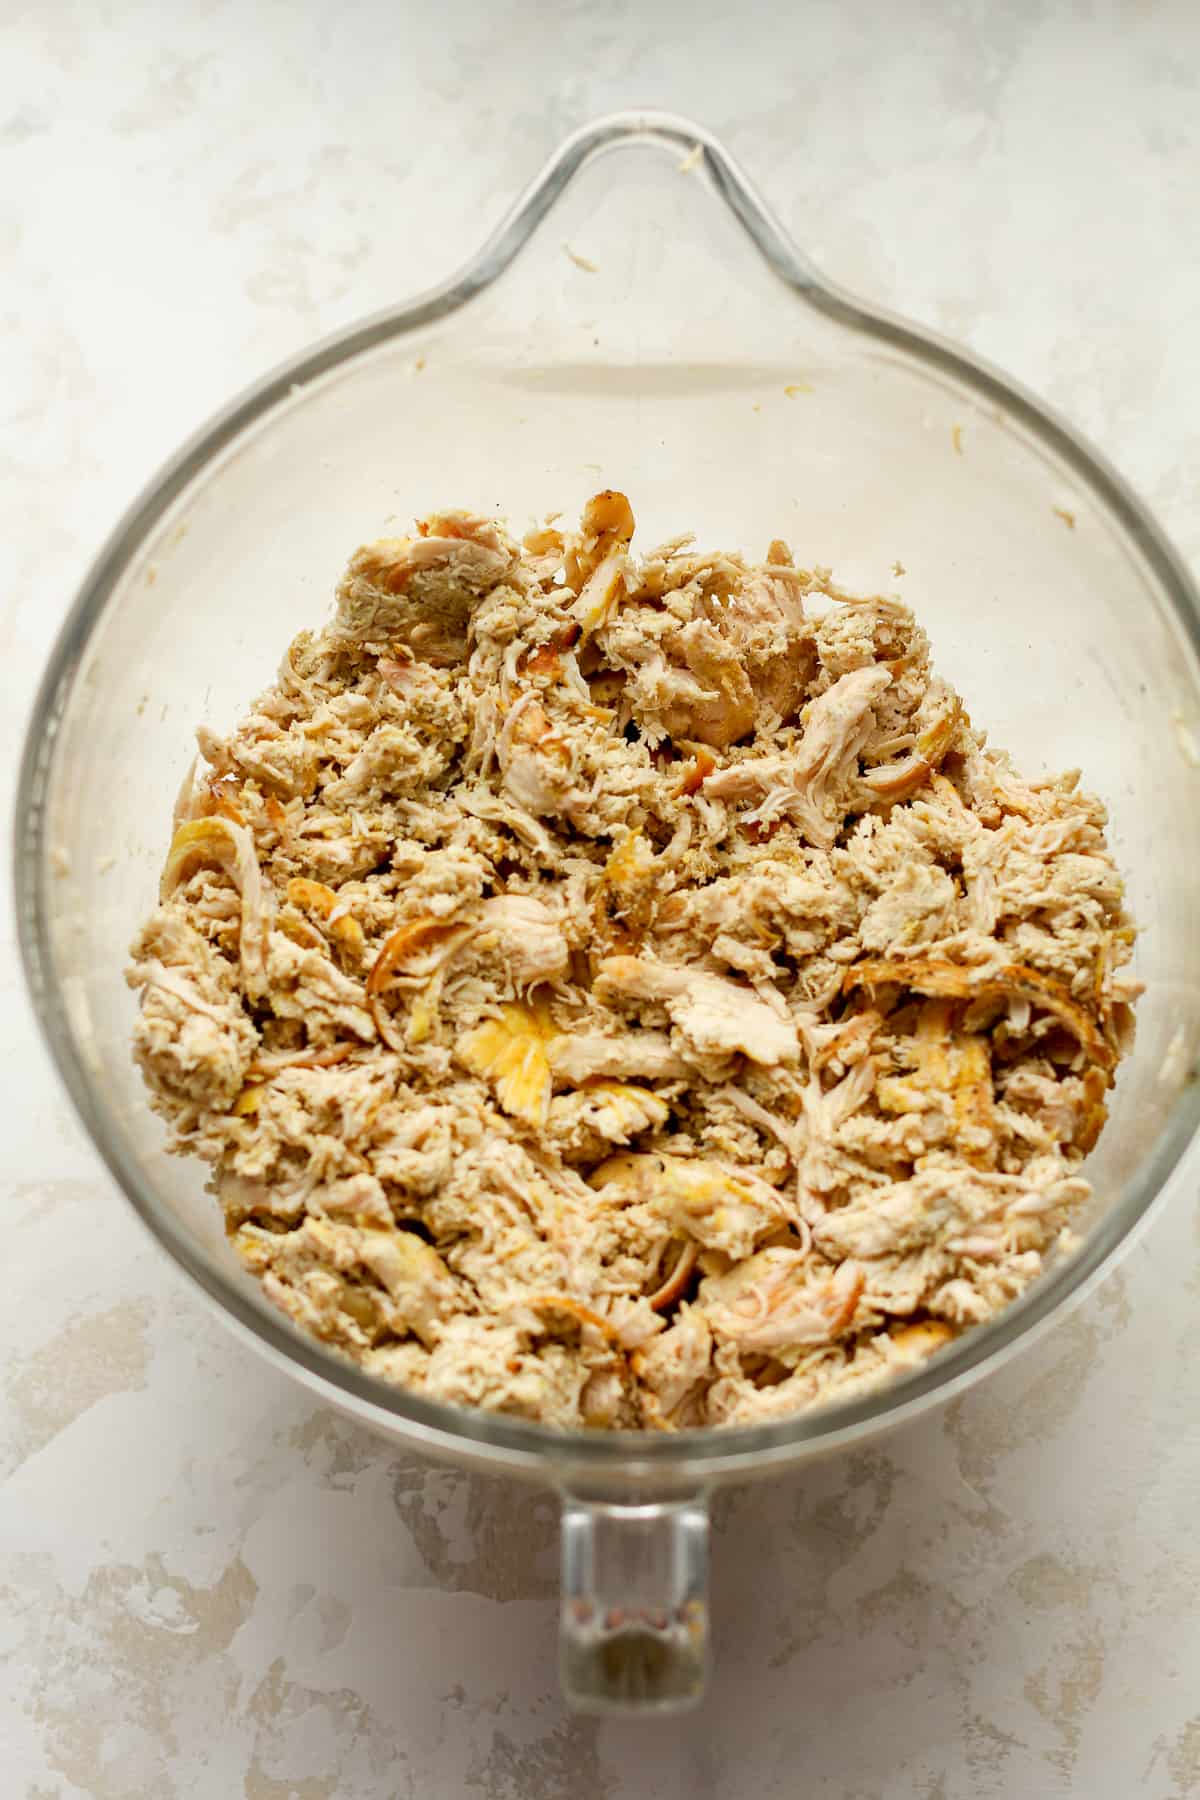 The shredded chicken in a standing mixer bowl.